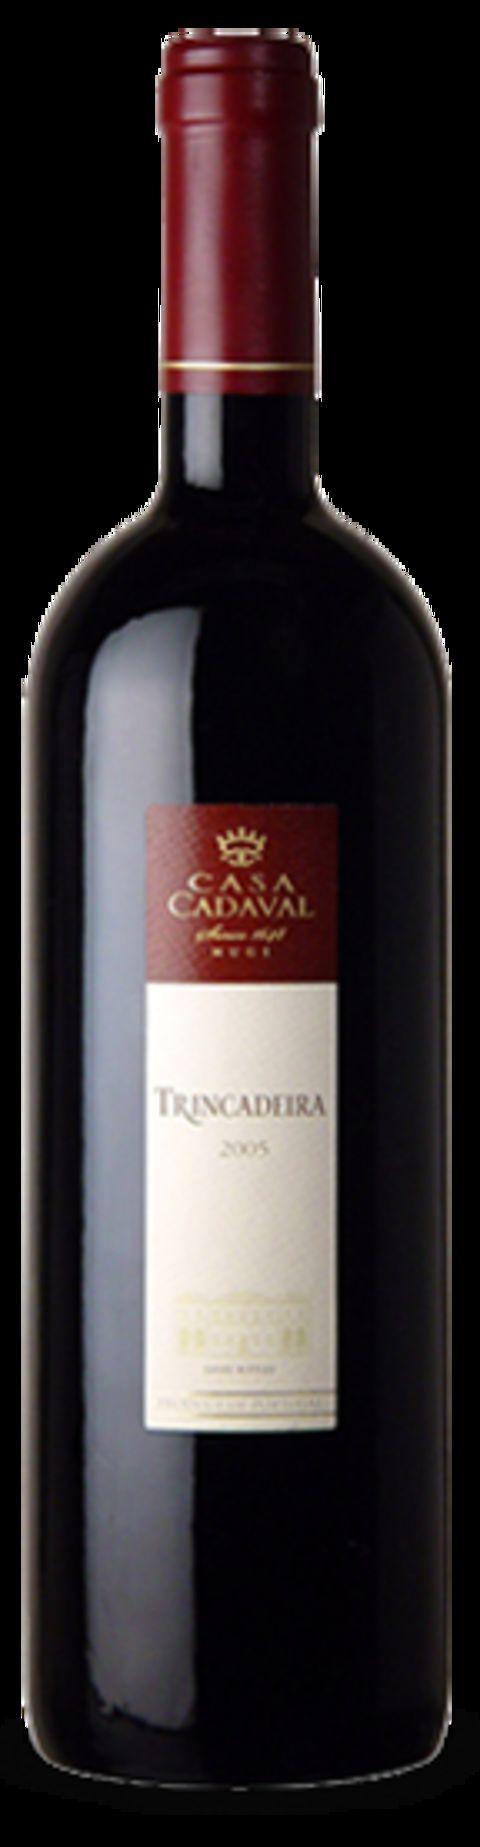 and long finish Serving Temperature: 18ºC Dishes: Will matchperfectly with red meat, game pie or soft cheeses Consumption:Drink nowor cellar for up to 10 years Trincadeira Region: Tejo Certification: